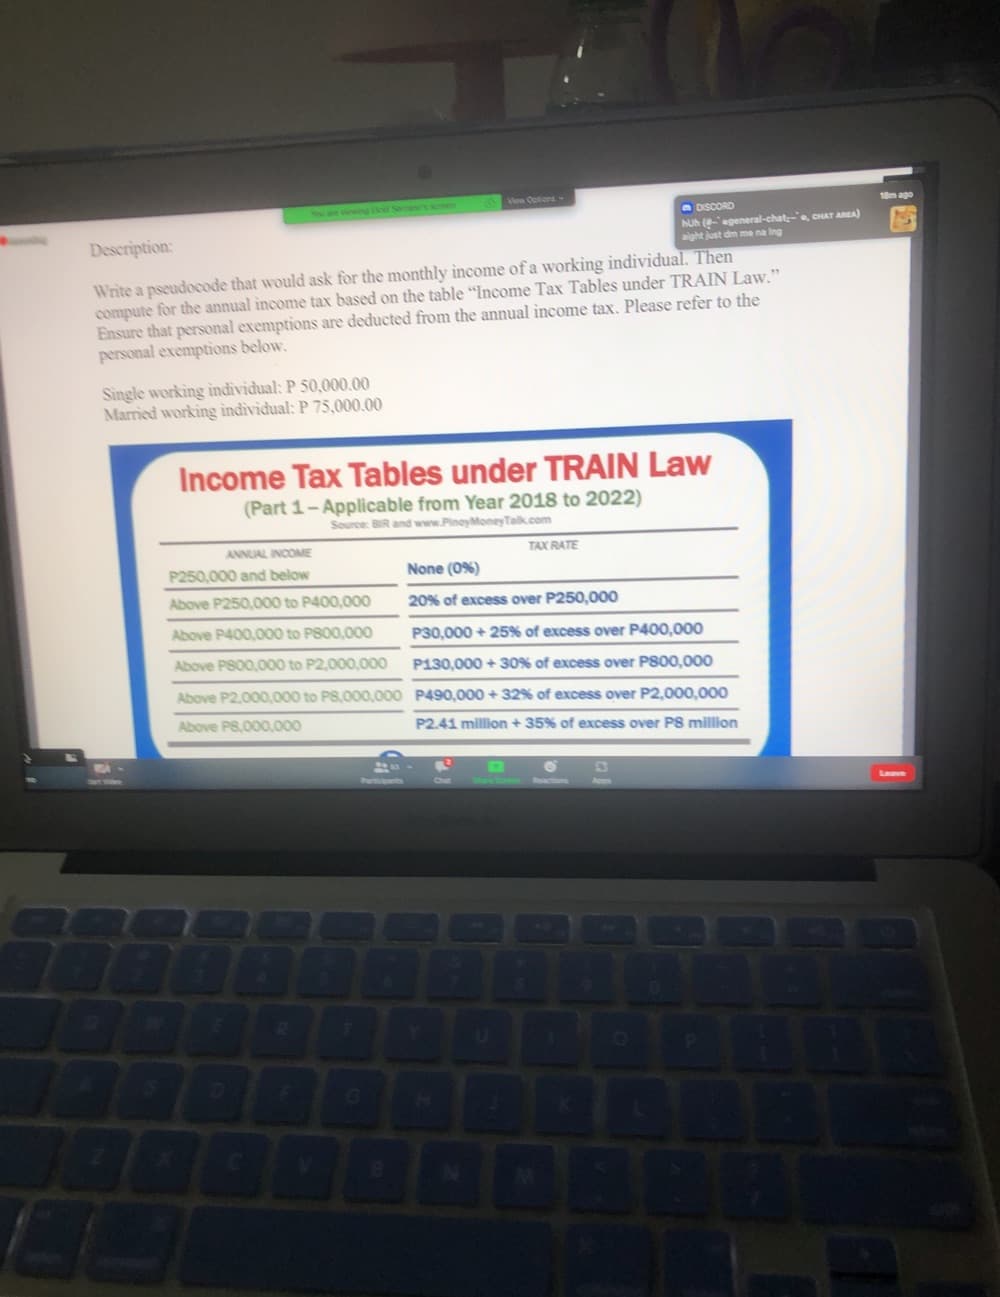 Vea Optiona
Y are vewing to See's semen
18m ago
O DISCORD
huh egeneral-chat-e, CHAT AREA)
aight just dm me na Ing
Description:
Write a pseudocode that would ask for the monthly income of a working individual. Then
compute for the annual income tax based on the table "Income Tax Tables under TRAIN Law."
Ensure that personal exemptions are deducted from the annual income tax. Please refer to the
personal exemptions below.
Single working iìndividual: P 50,000.00
Married working individual: P 75,000.00
Income Tax Tables under TRAIN Law
(Part 1-Applicable from Year 2018 to 2022)
Source: BIR and www.PinoyMoneyTalk.com
ANNUAL INCOME
TAX RATE
P250,000 and below
None (0%)
Above P250,000 to P400,000
20% of excess over P250,000
Above P400,000 to P800,000
P30,000 + 25% of excess over P400,000
Above P800,000 to P2,000,000
P130,000 + 30% of excess over P800,000
Above P2,000,000 to P8,000,000 P490,000 + 32% of excess over P2,000,000
Above P8,000,000
P2.41 million + 35% of excess over P8 million
